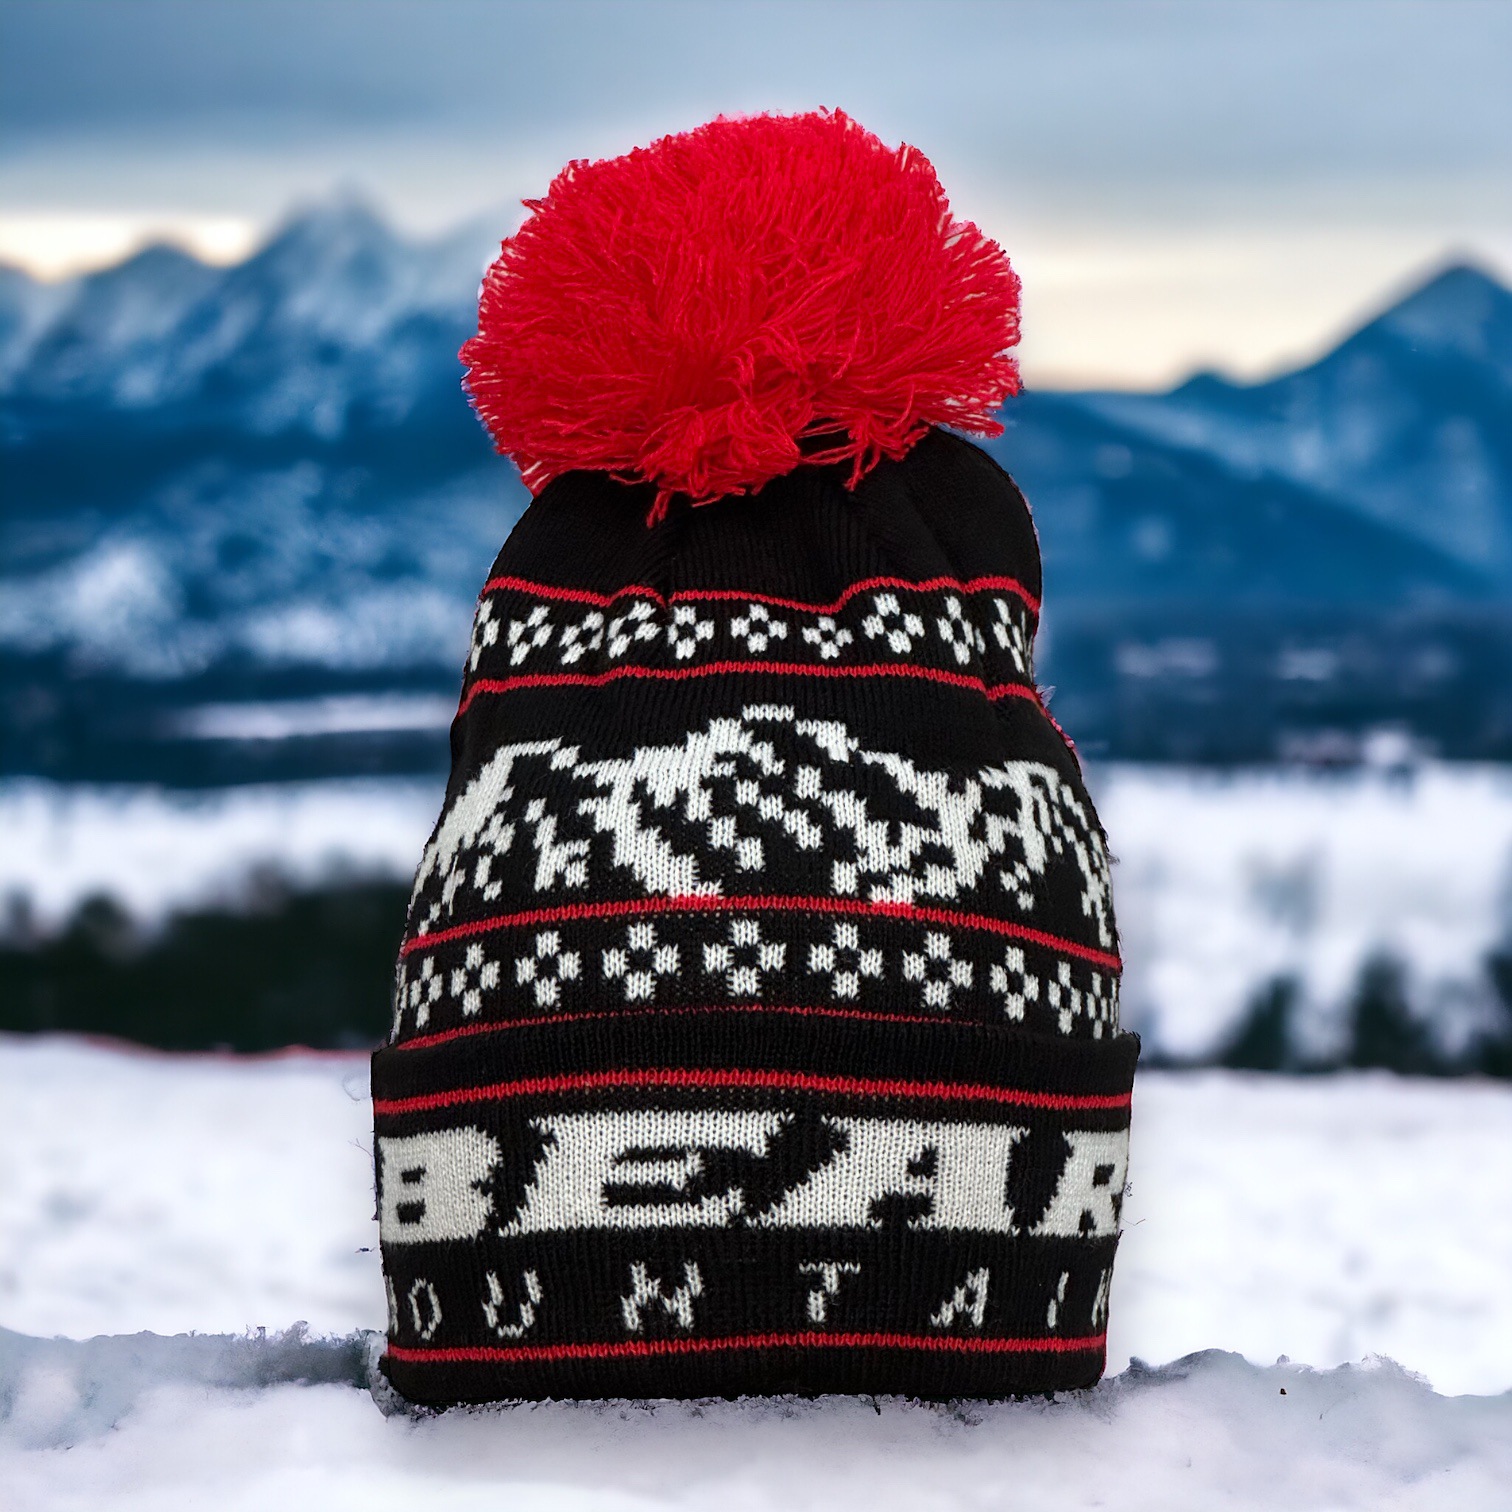 Black Beanie with white bear mountain stitching for the logo and red accent stitching with red pom pom at top